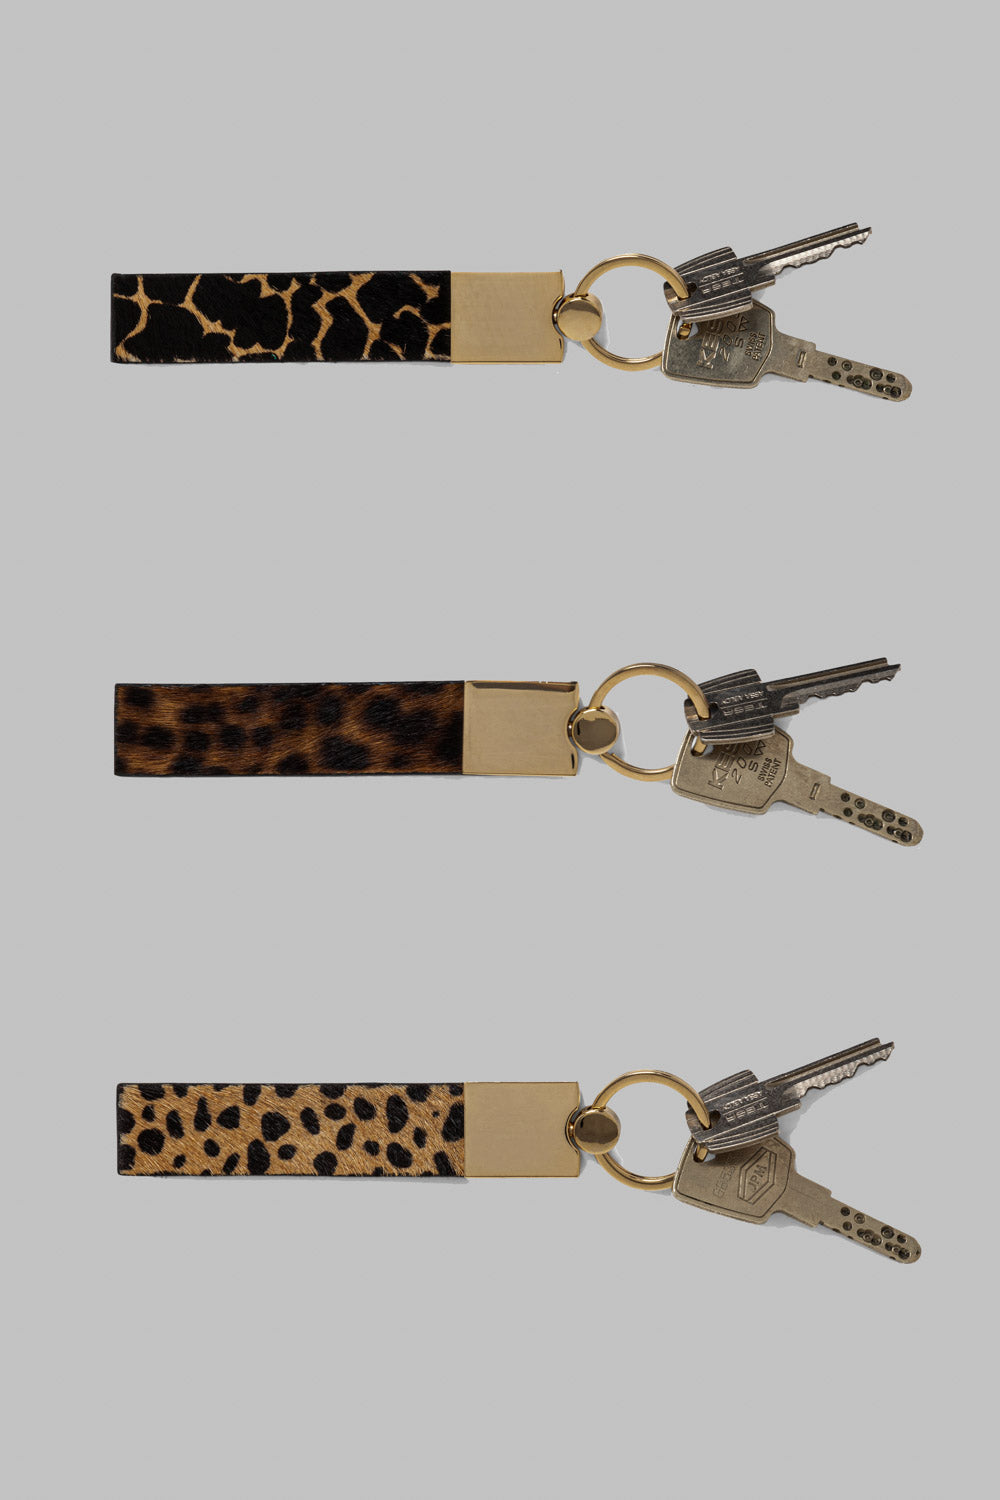 The Minis - Key holder in Giraffe printed leather